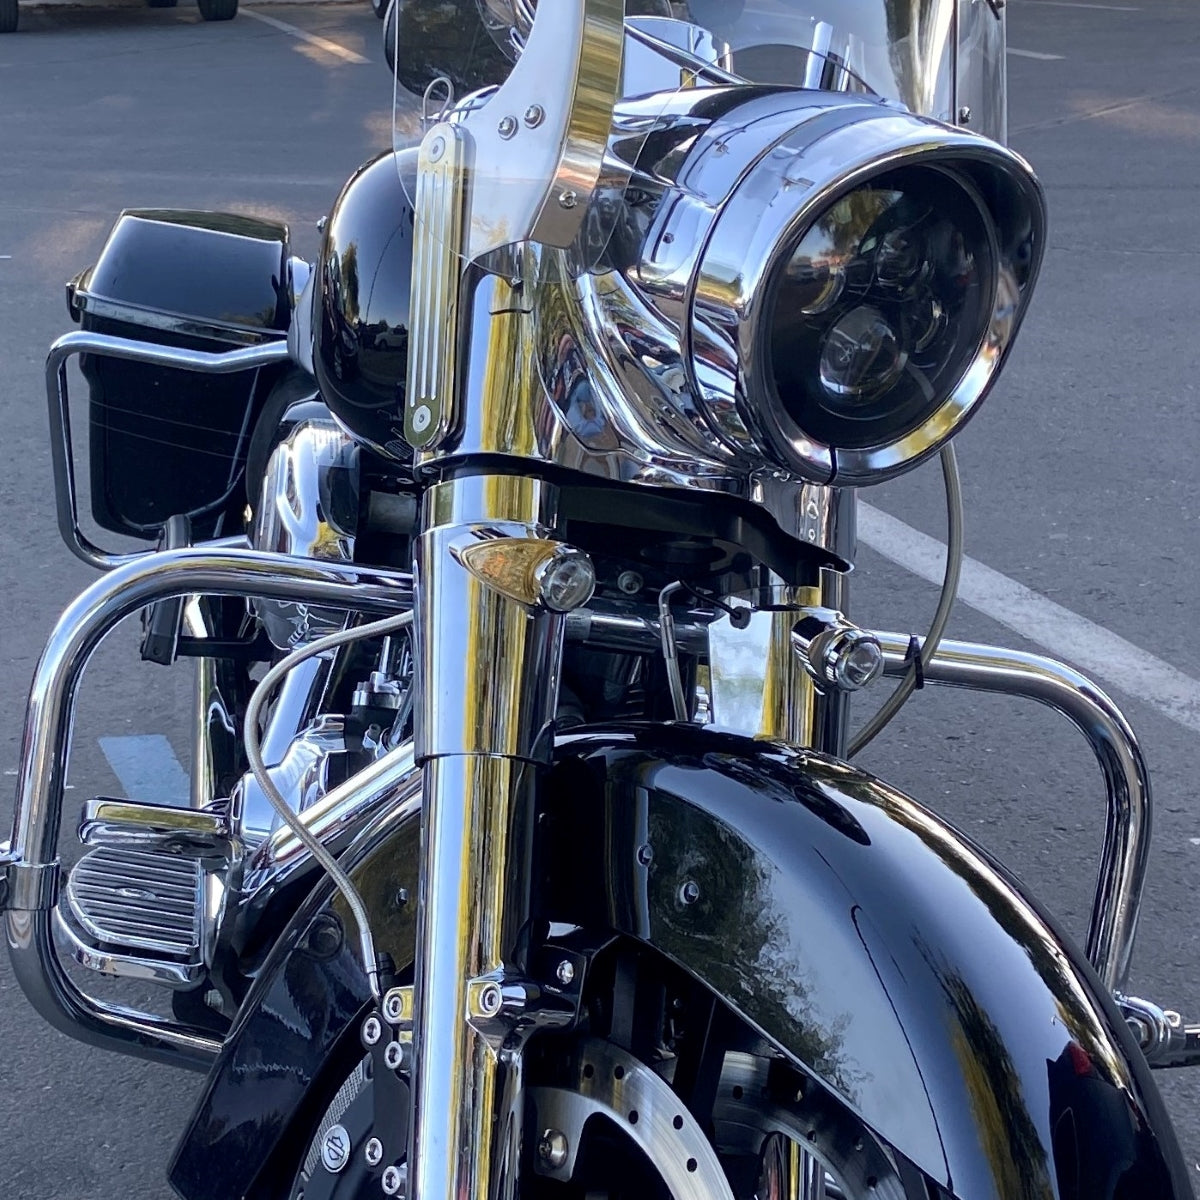 GeezerEngineering Cowbells (LED auxiliary light & turn signal) Harley 2014 & later Touring Models (chrome)